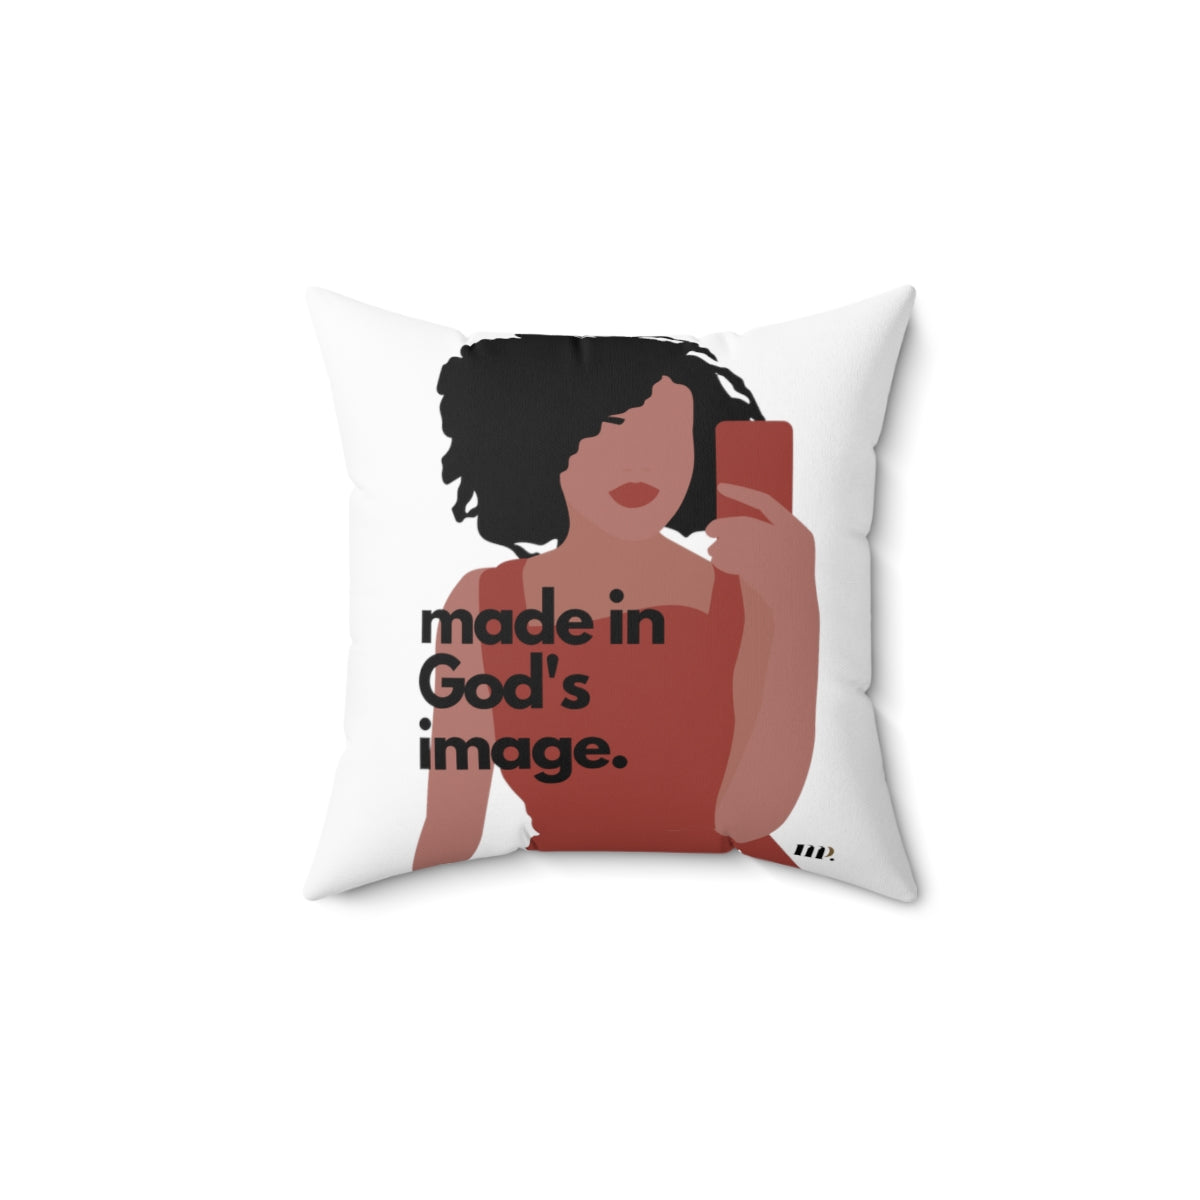 "melanin" & "made in God's image" Double-sided Spun Polyester Square Pillow